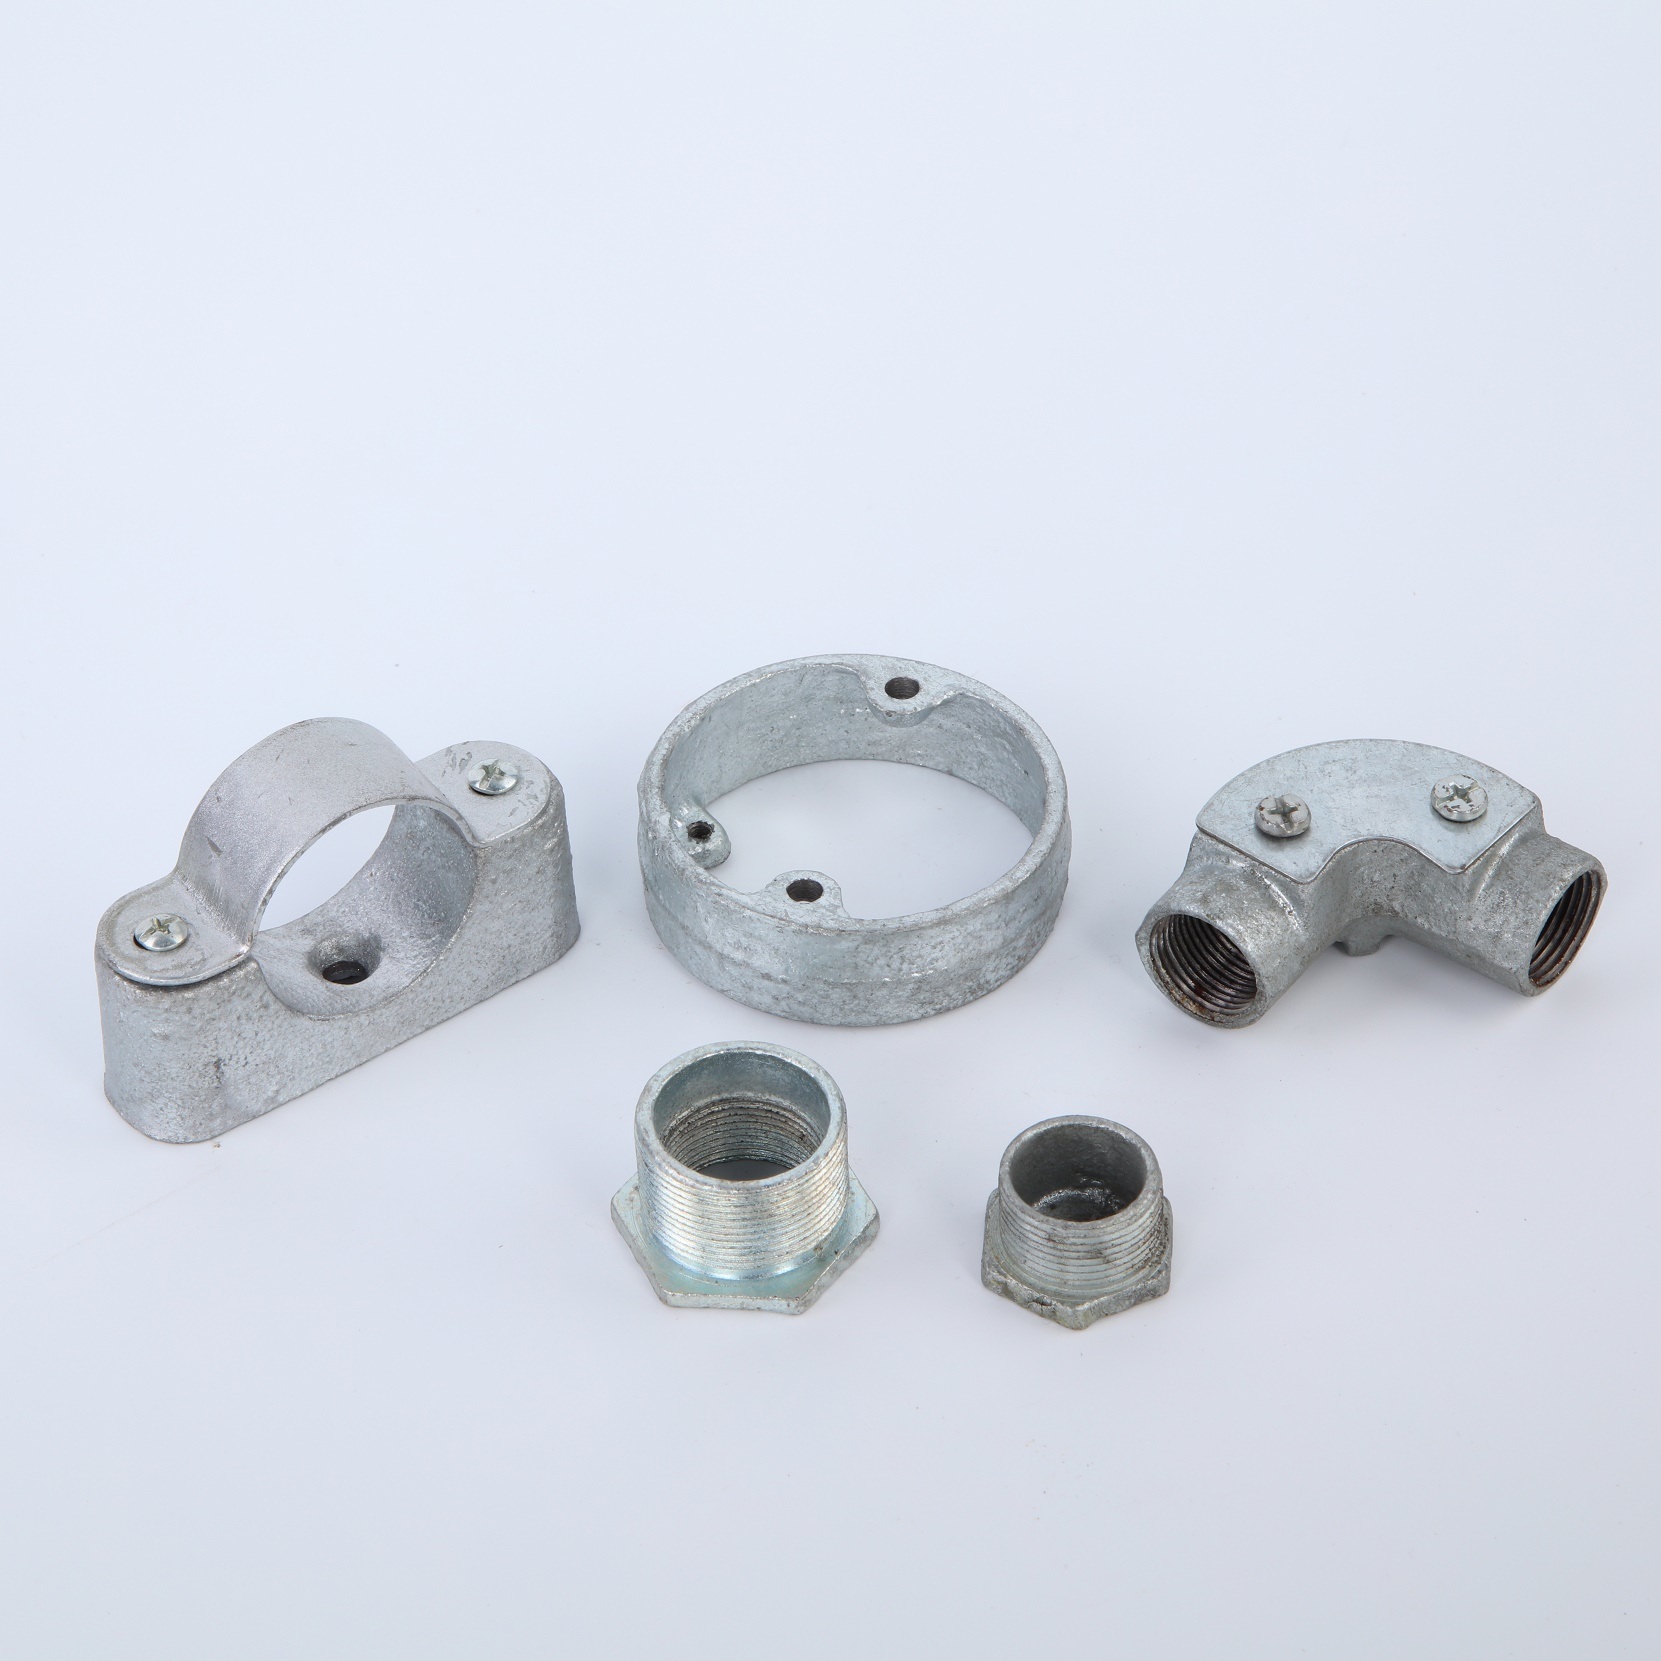 Malleable Iron Fitting Reducer Bush